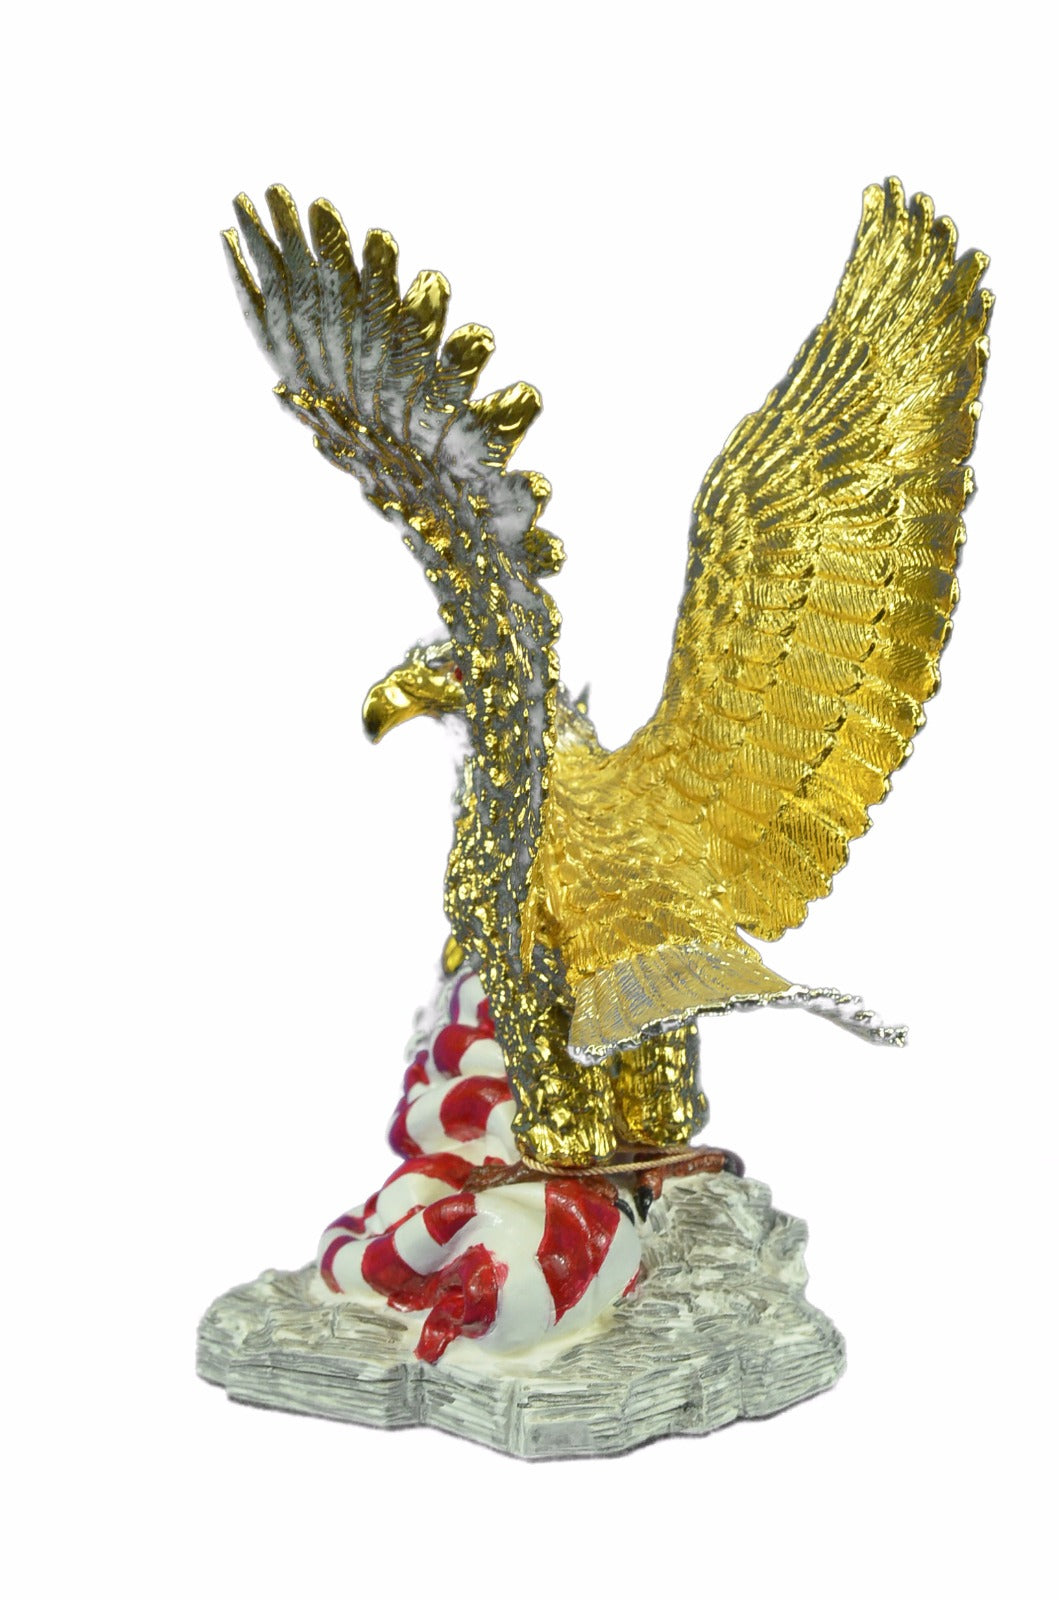 24K Gold Covered Bronze American Eagle with YSA Flag Sculpture Figurine Figure